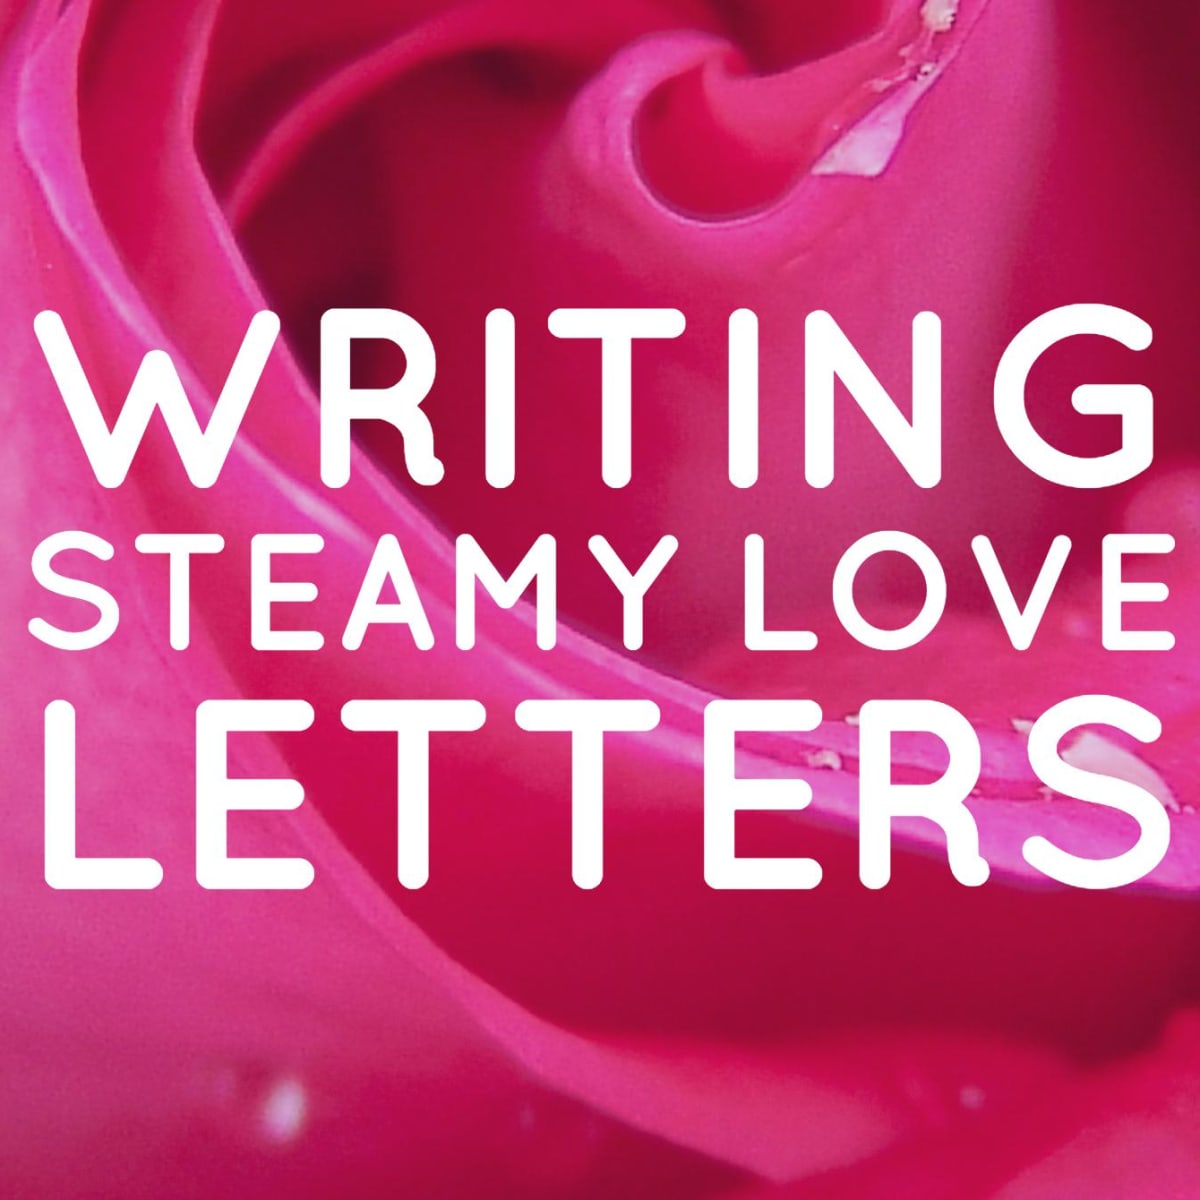 Love letters and erotic letters